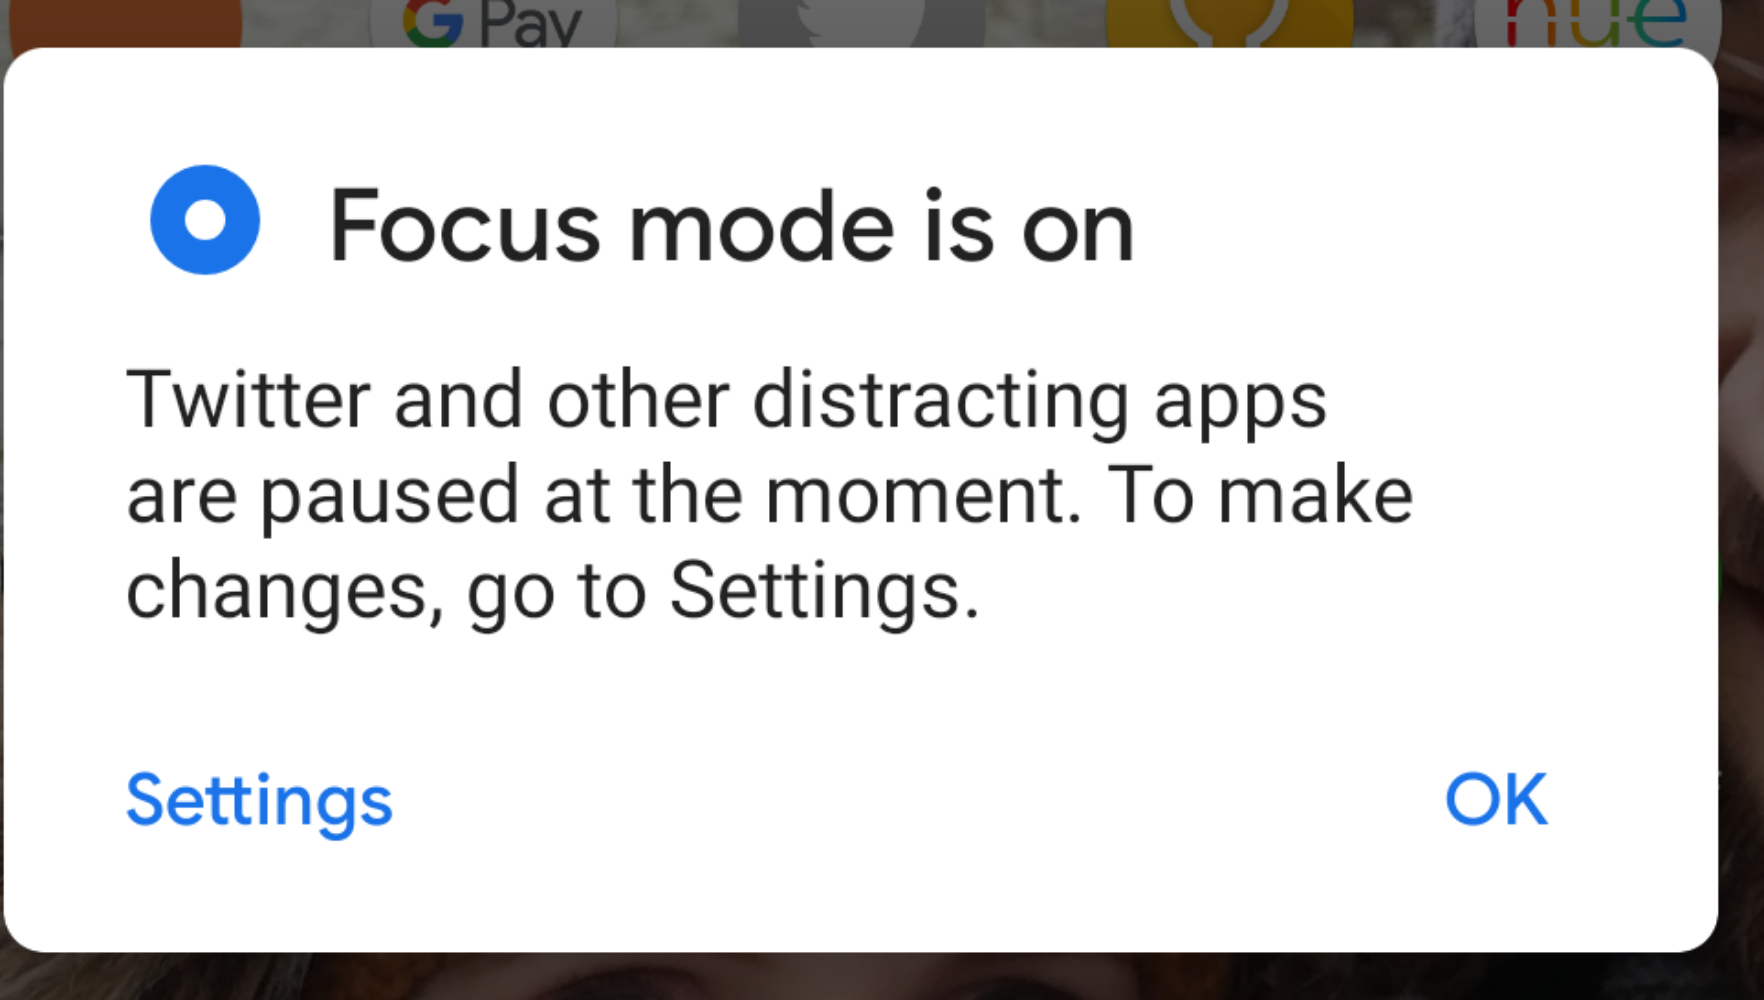 A pop-up letting the user know that focus mode is enabled, and won't allow access to the app